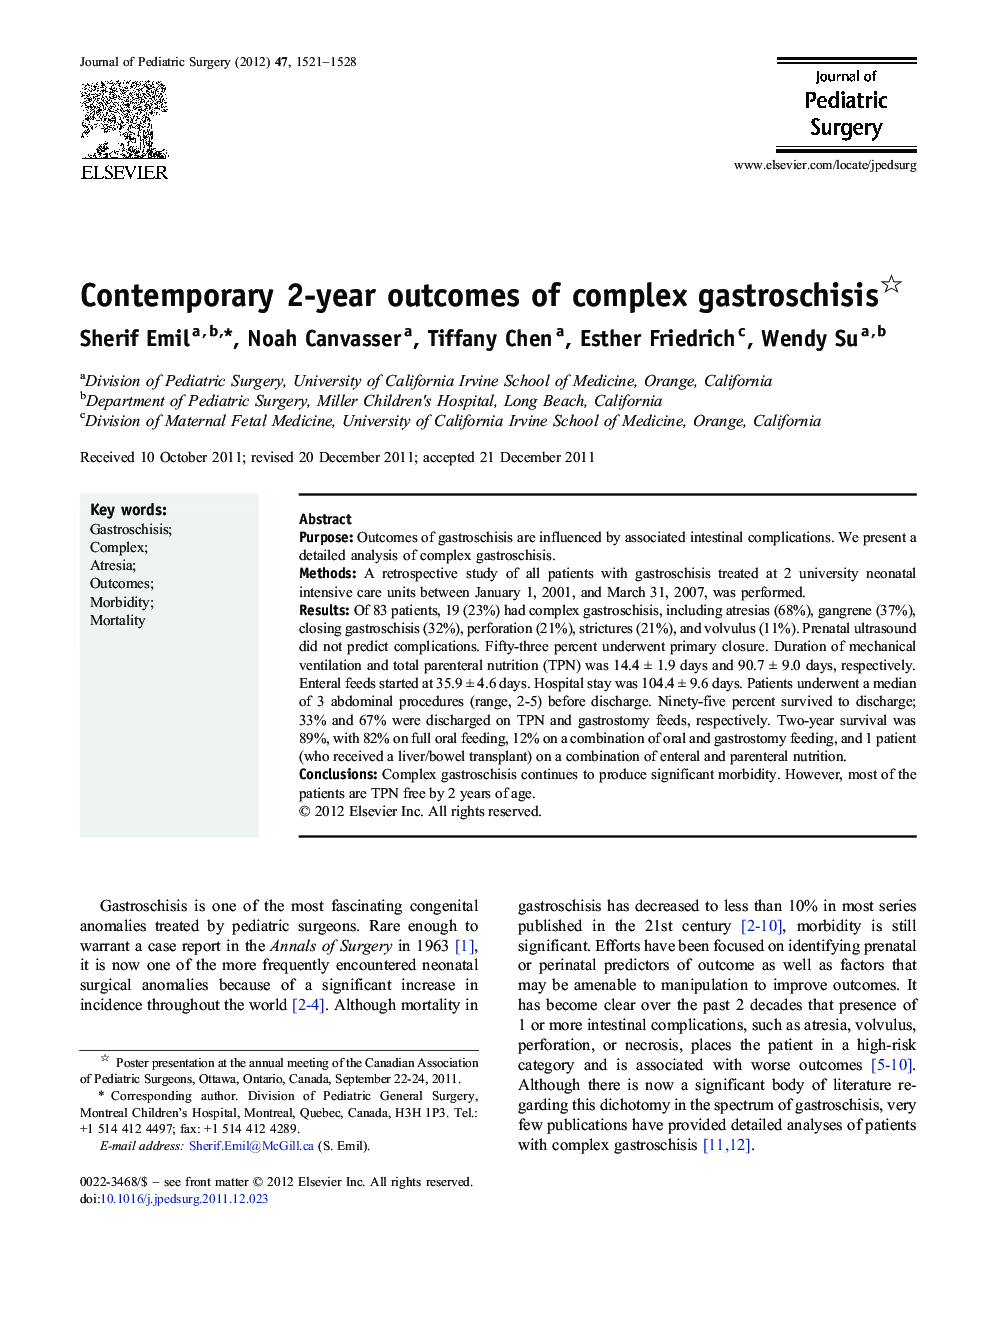 Contemporary 2-year outcomes of complex gastroschisis 